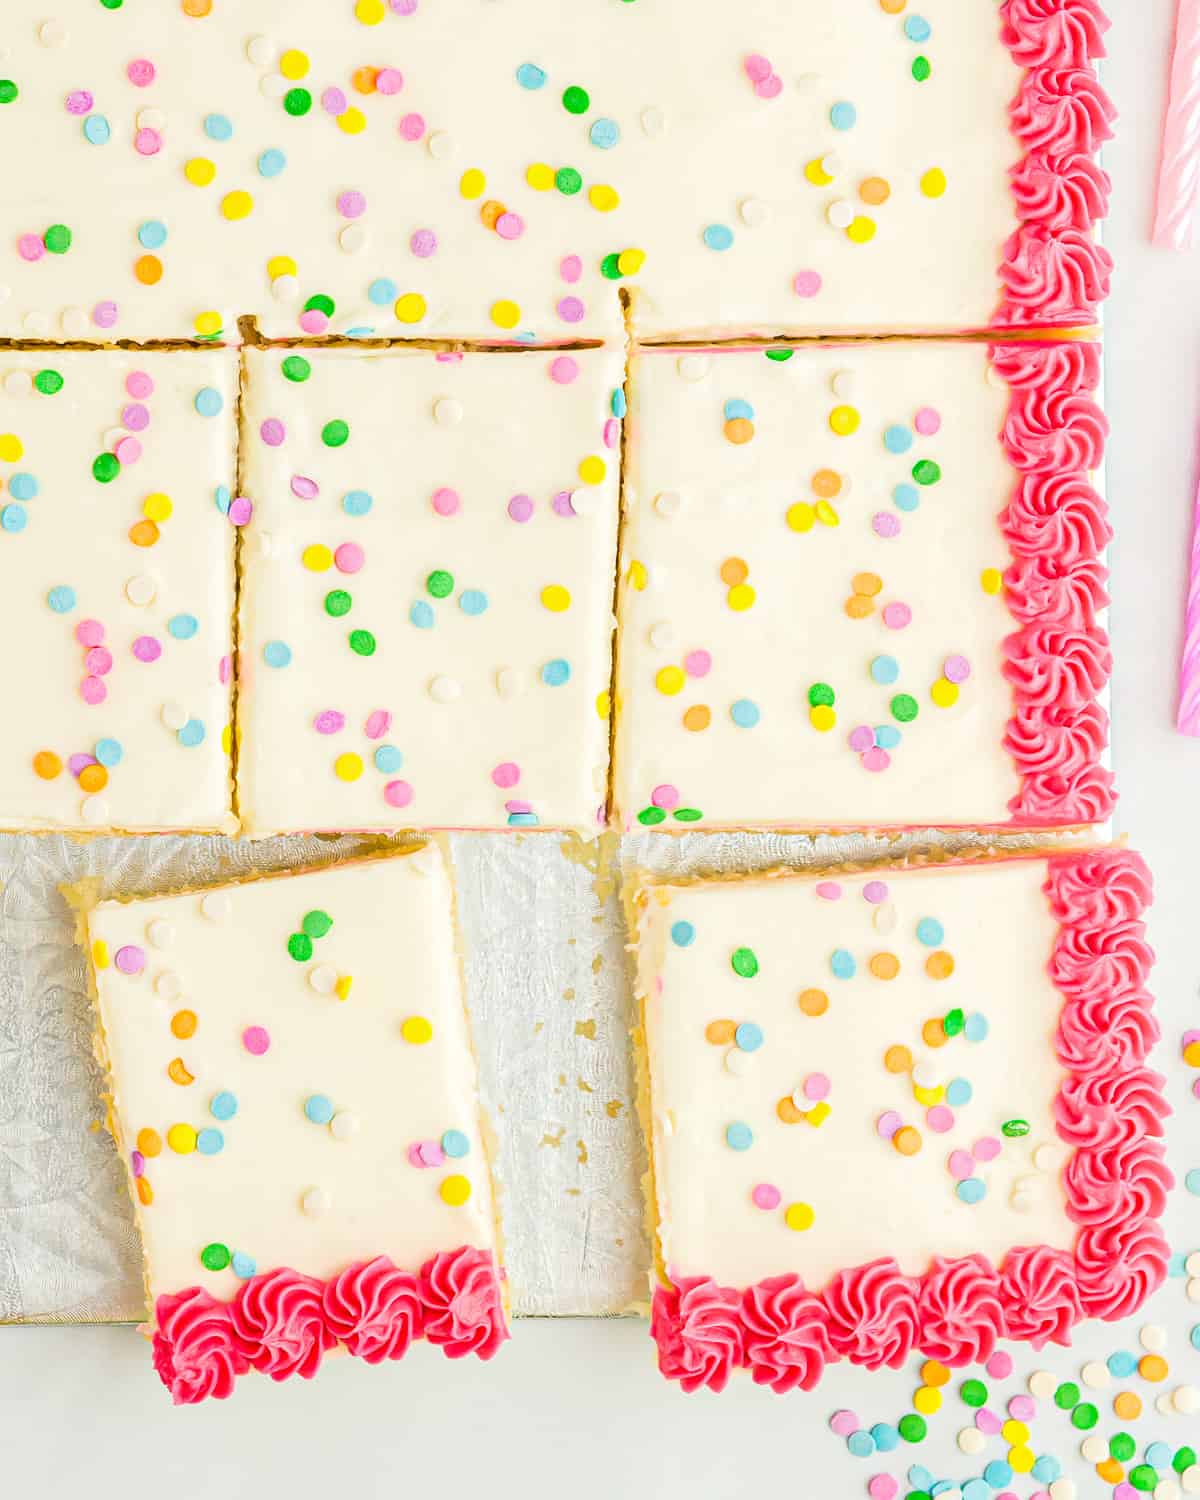 close up overhead view of a partially sliced vanilla sheet cake decorated with white icing with a pink border and sprinkles.